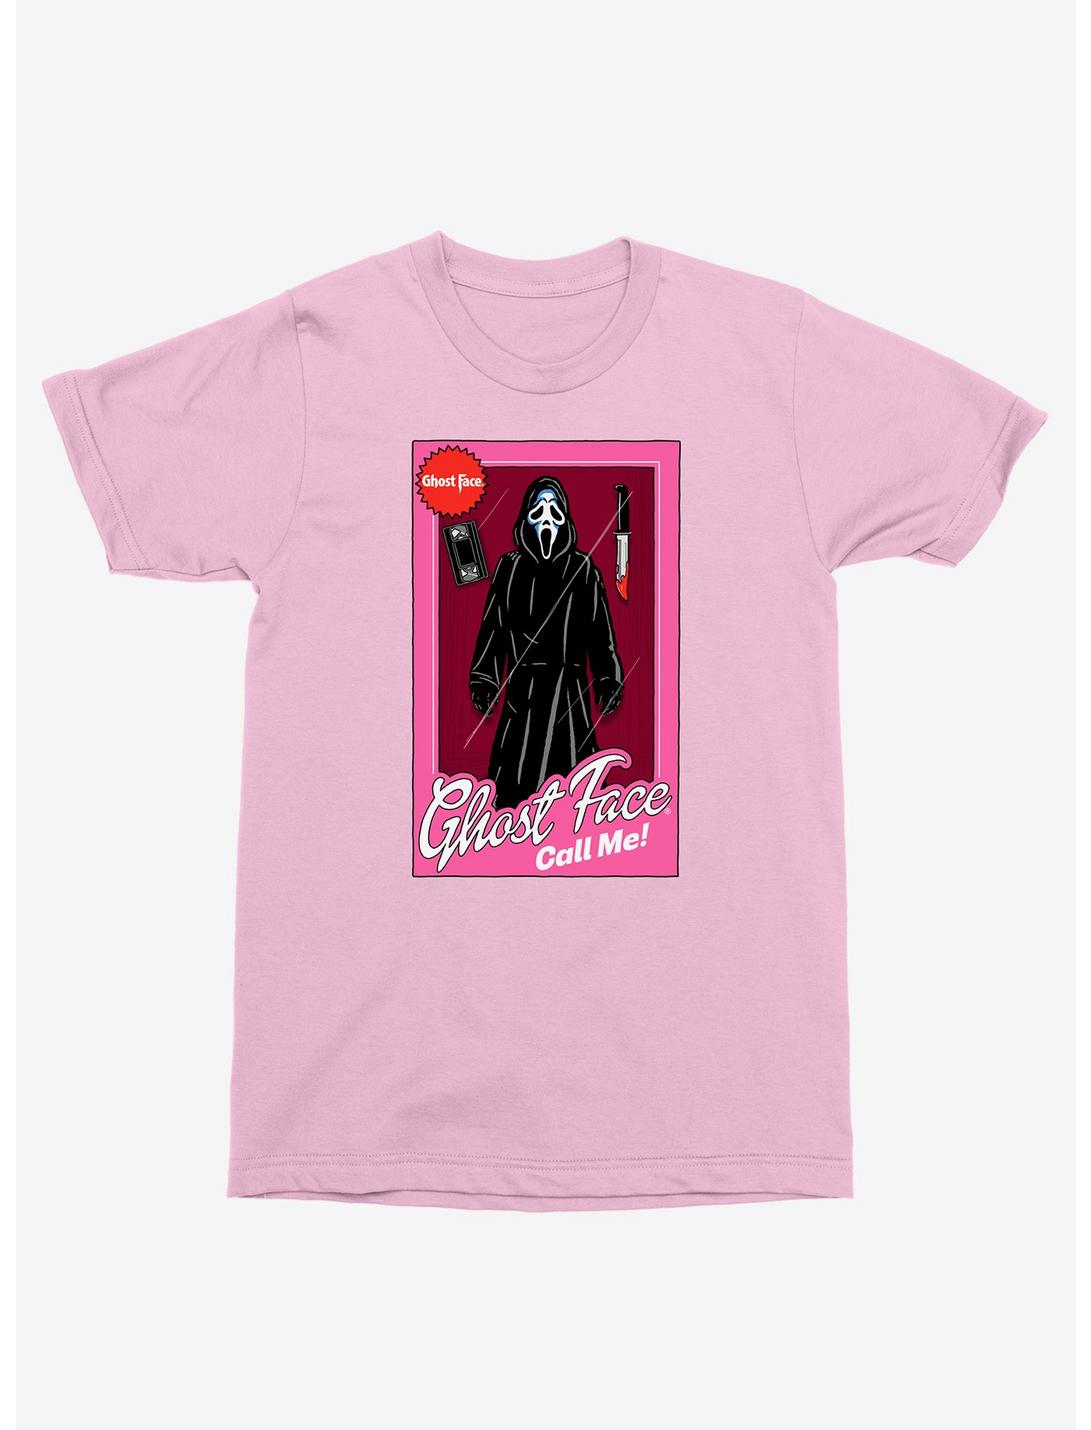 Scream Ghost Face Doll T-Shirt, PINK, hi-res